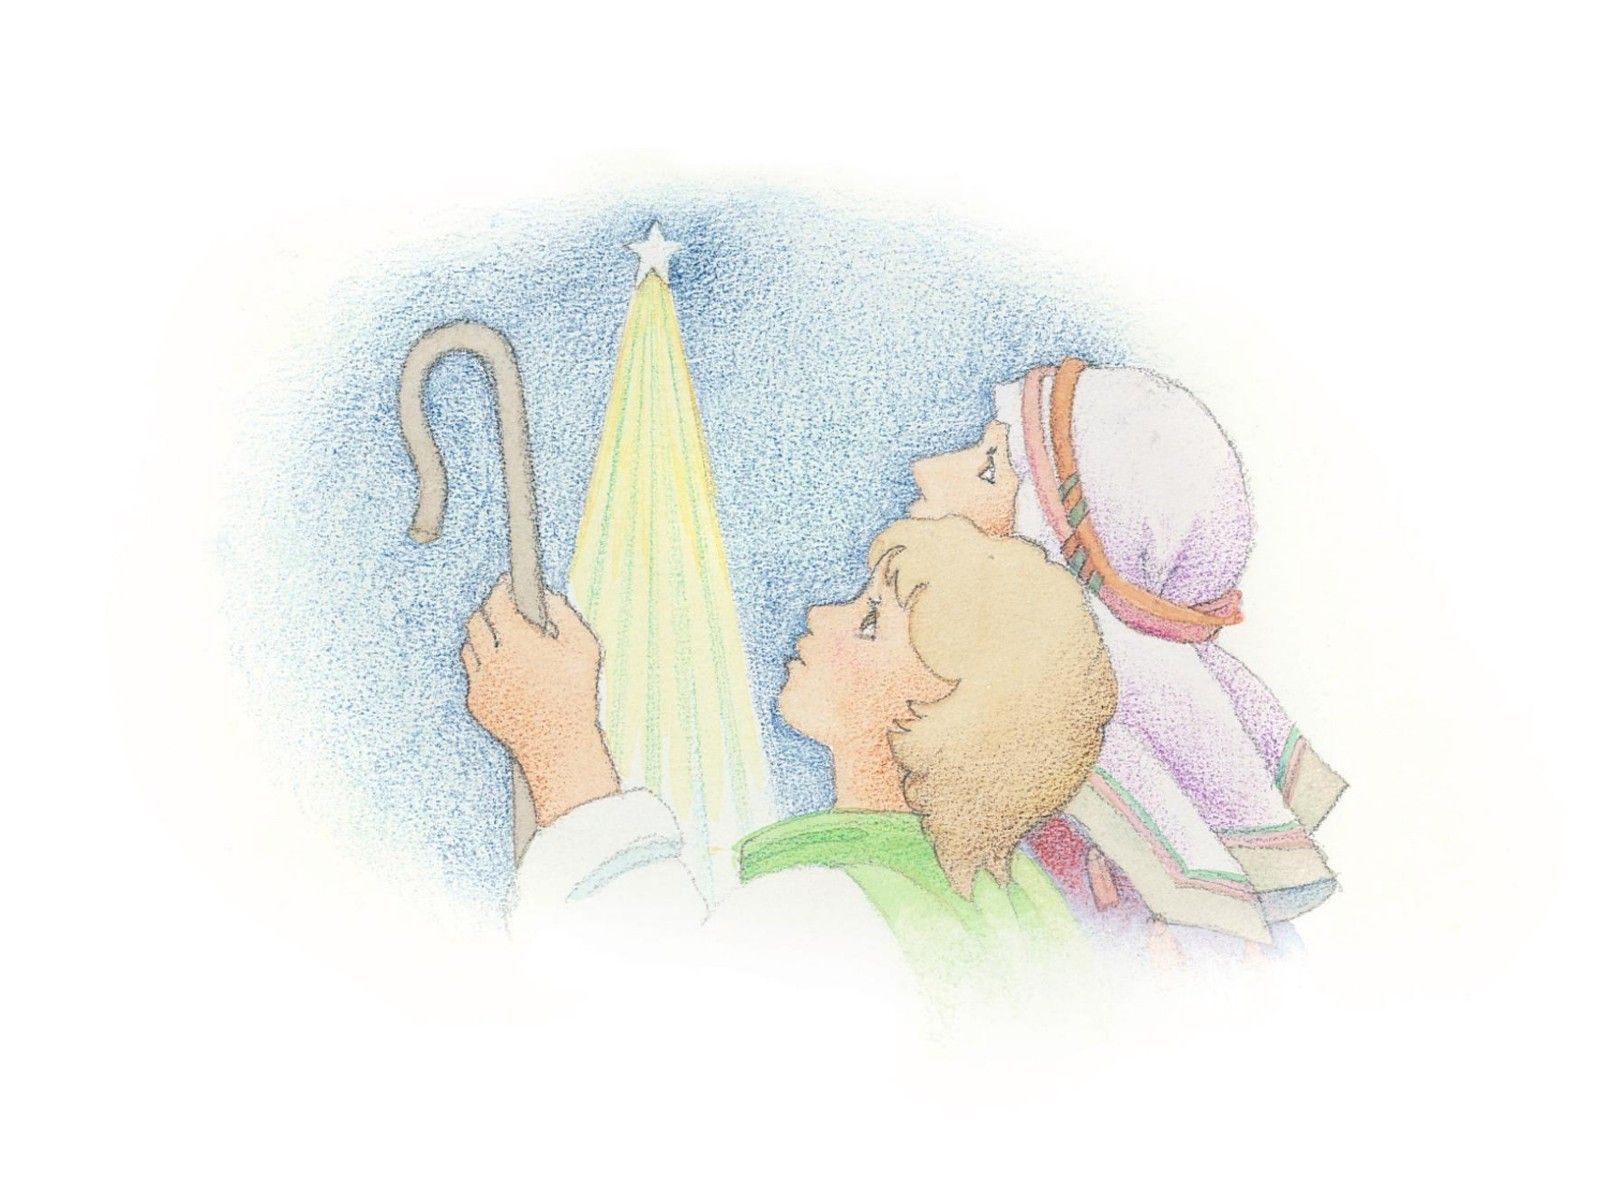 Shepherds see the Christmas star. From the Children’s Songbook, page 47, “Sleep, Little Jesus”; watercolor illustration by Phyllis Luch.